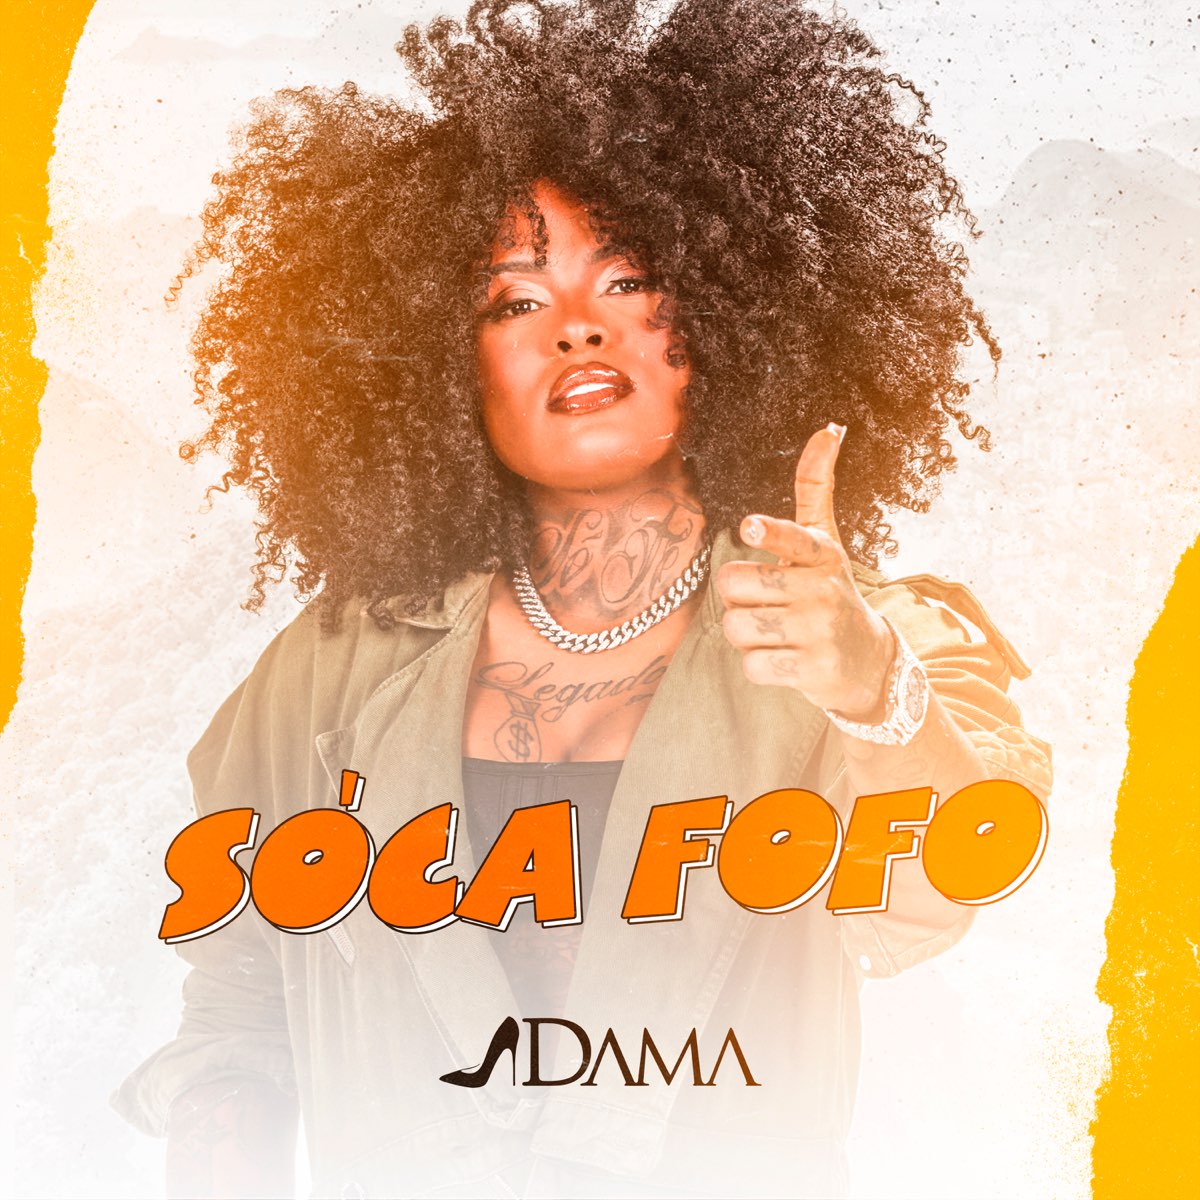 Stream Braga Soca Fofo music  Listen to songs, albums, playlists for free  on SoundCloud